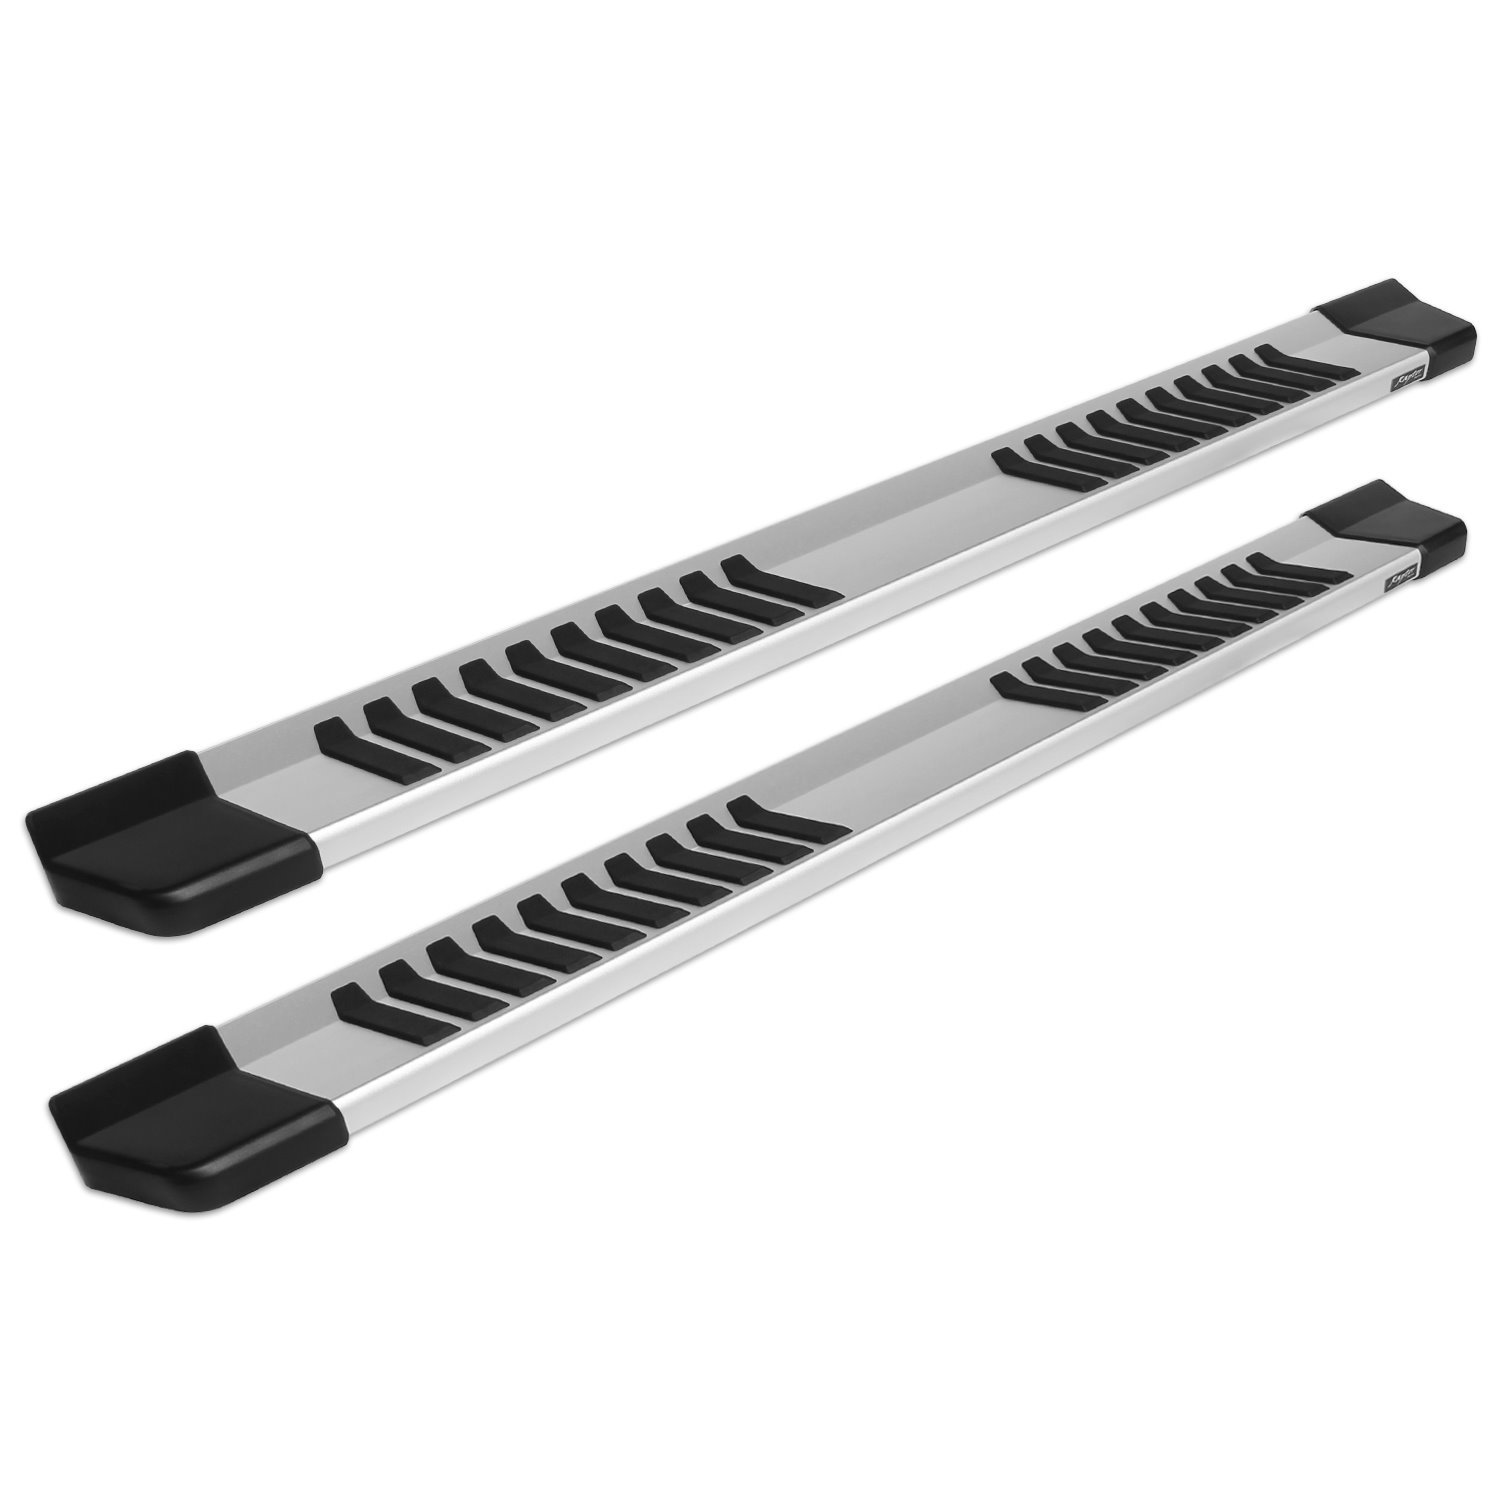 1703-0366 6 in OEM Style Slide Track Running Boards, Brushed Aluminum, 15-23 Ford F-150/F-250/F-350